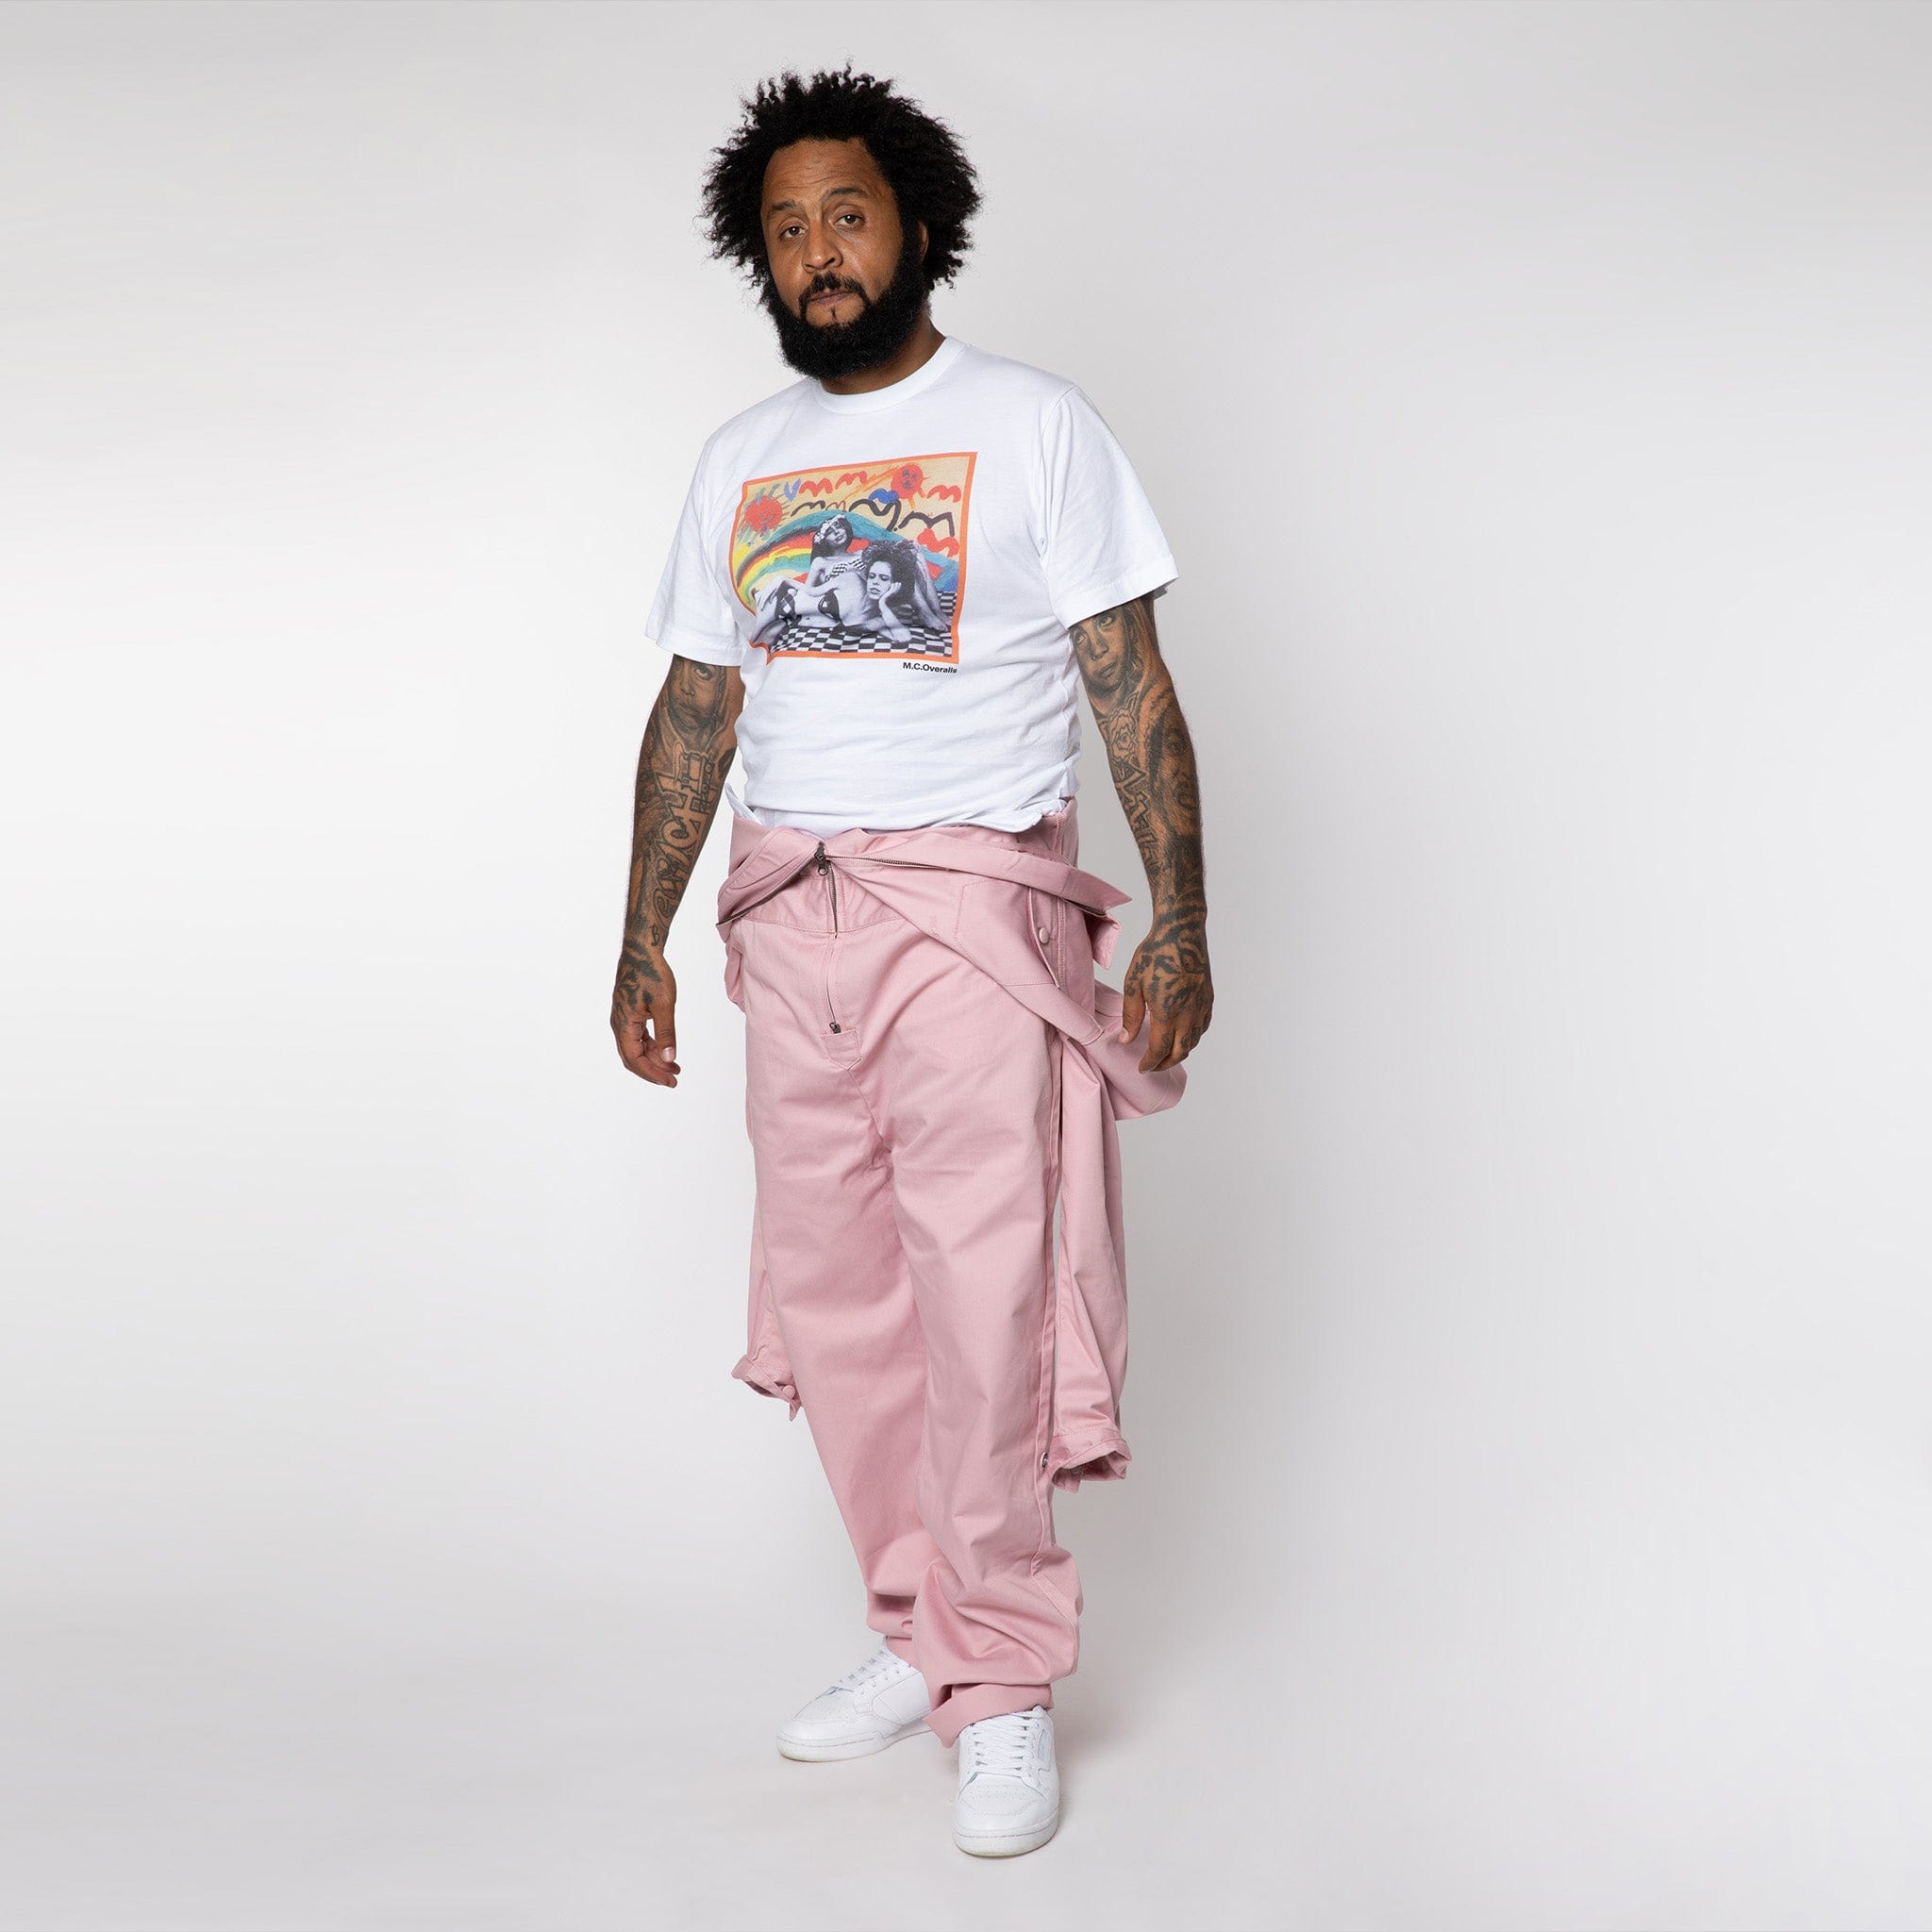 M.C.O&#39;s Dusty Pink Work Overalls and White Graphic Tee for Men in London, UK.